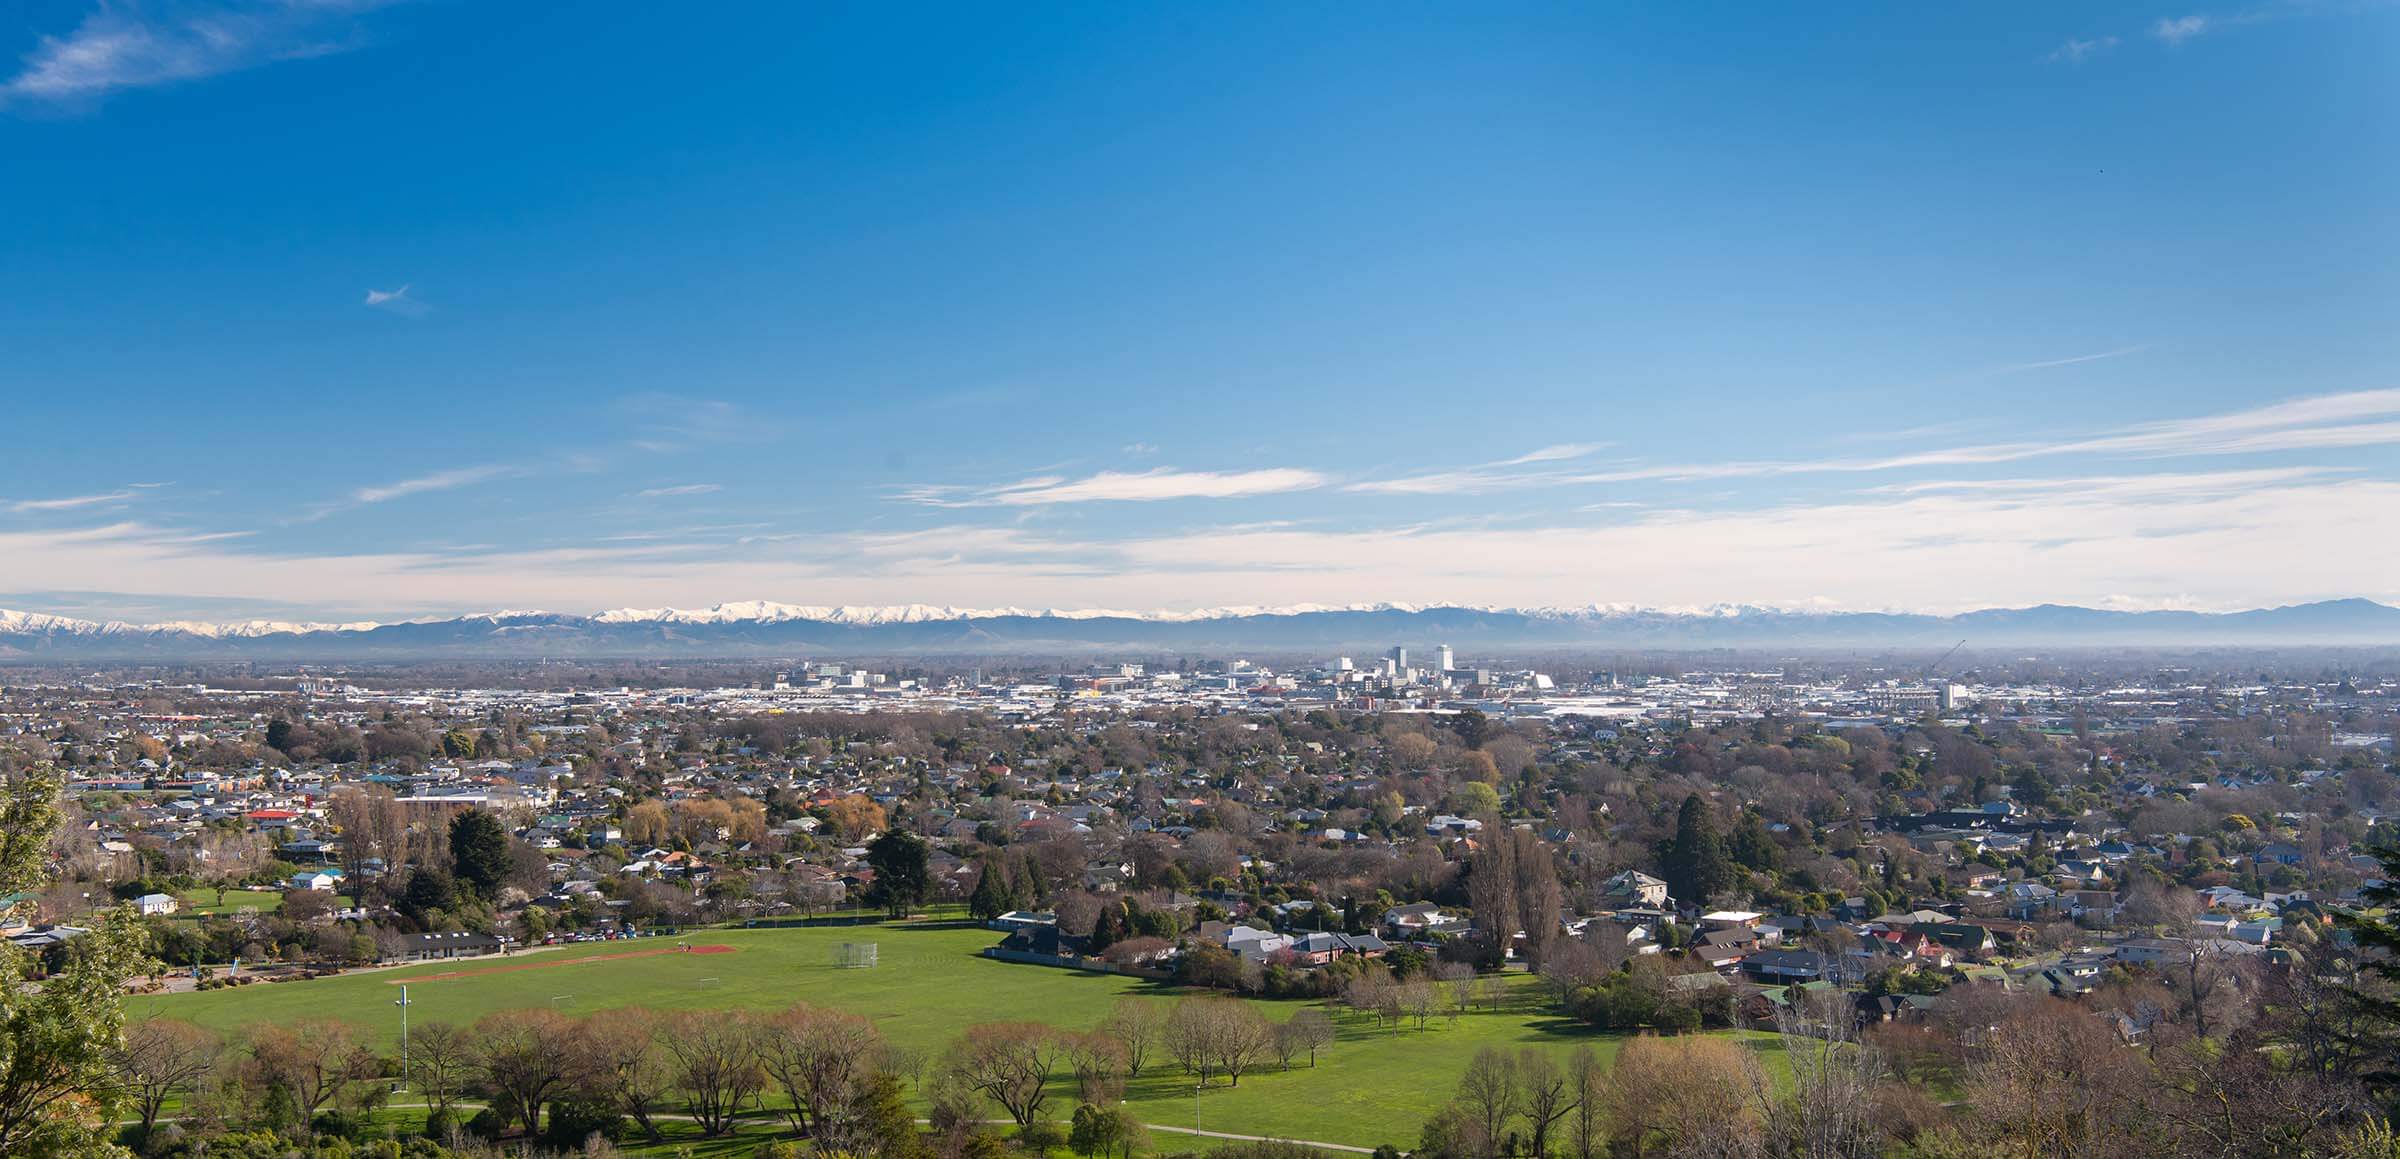 Christchurch City Landscape 2019 From CCC